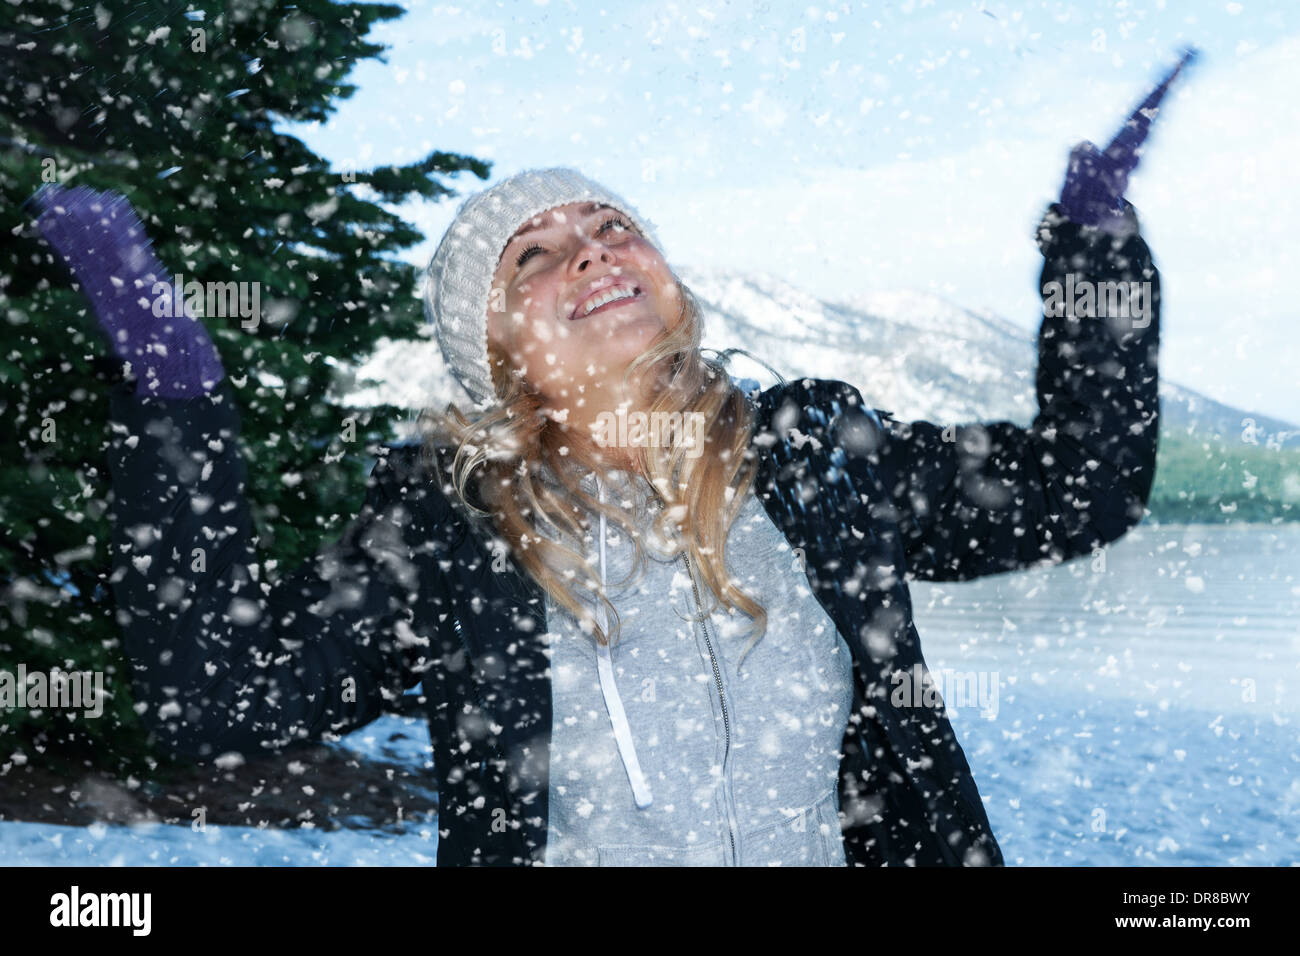 Portrait of young beautiful woman on winter outdoor background Stock Photo